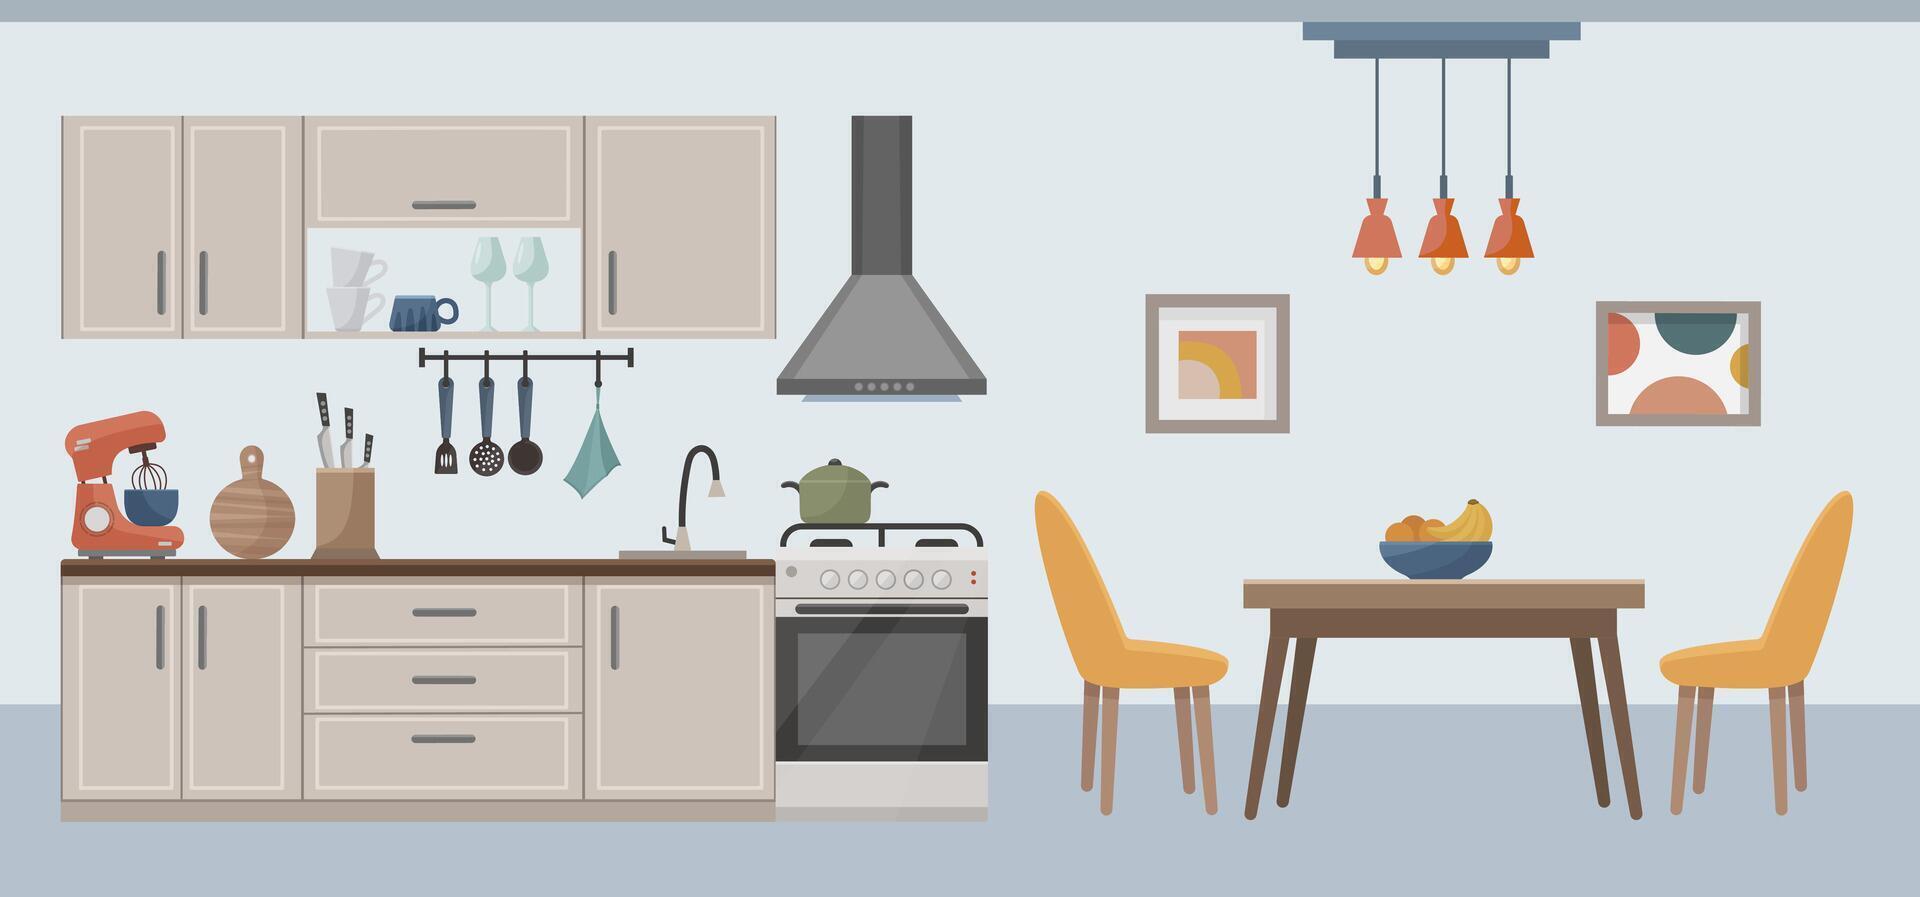 Cozy kitchen interior with furniture, stove, extractor hood. Decor for the kitchen. Kitchen furniture table, chairs, shelf, picture, kitchen window. Vector in flat style.